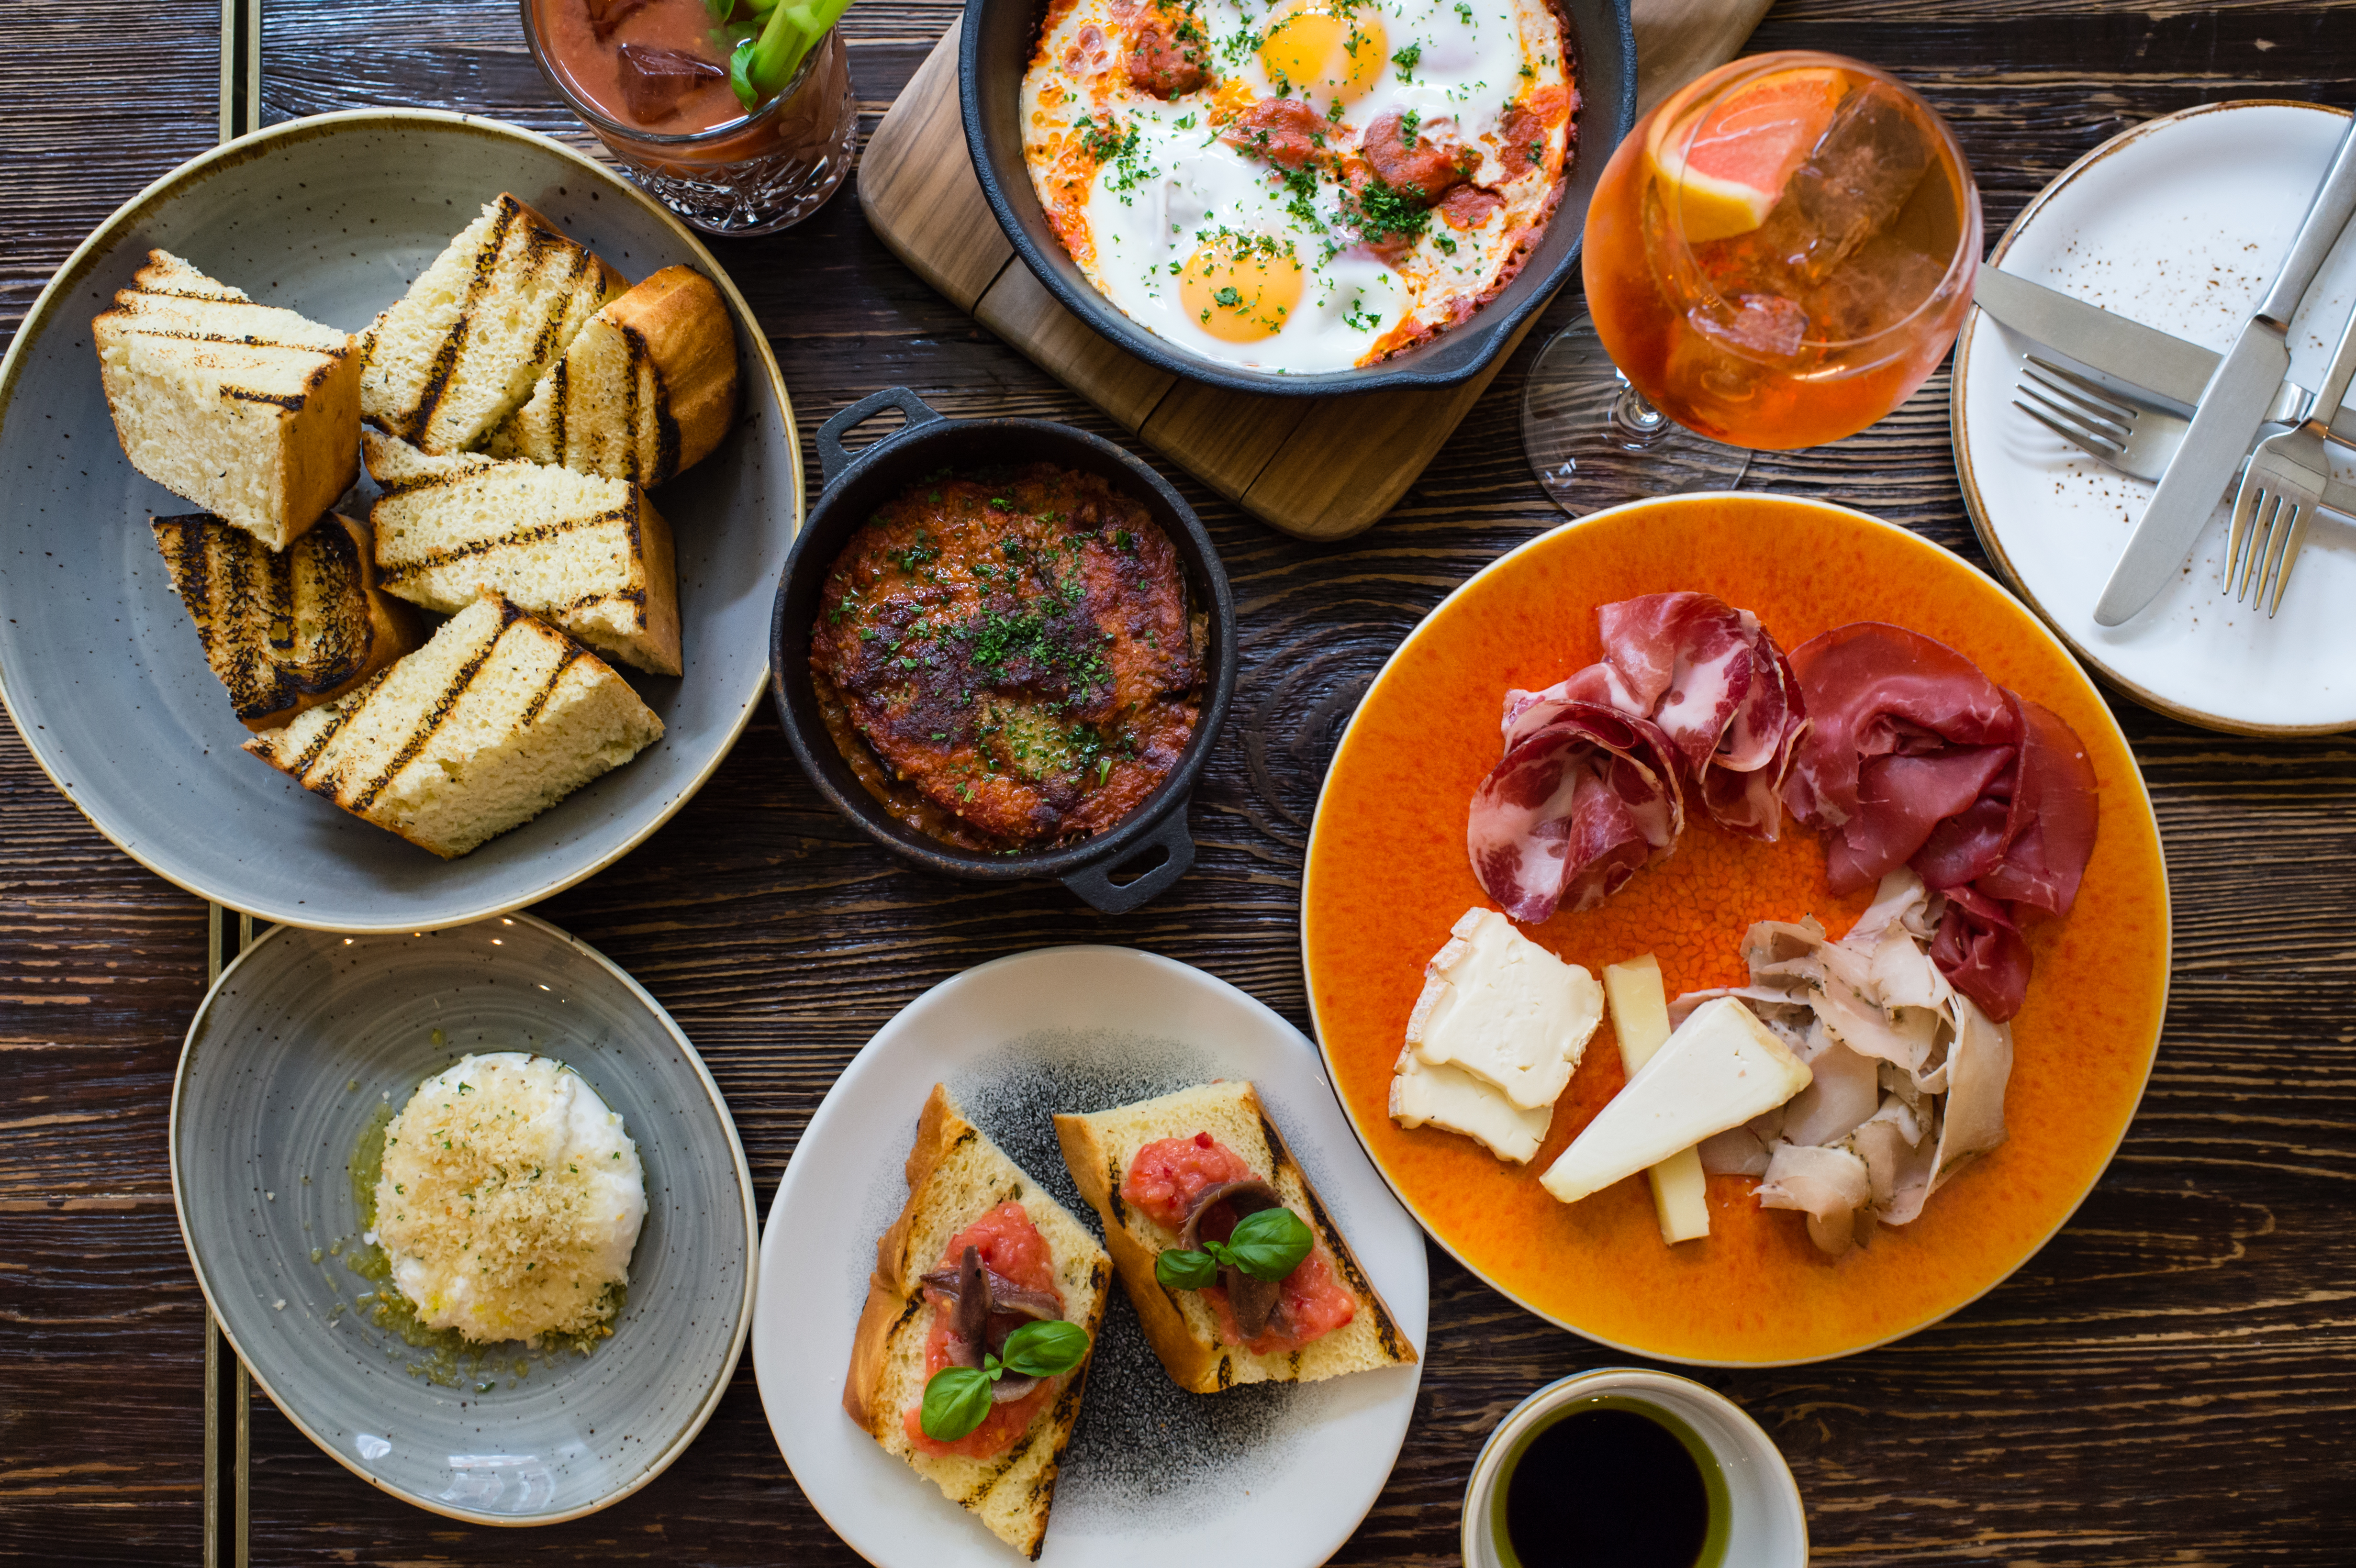 Where to Brunch this summer holidays